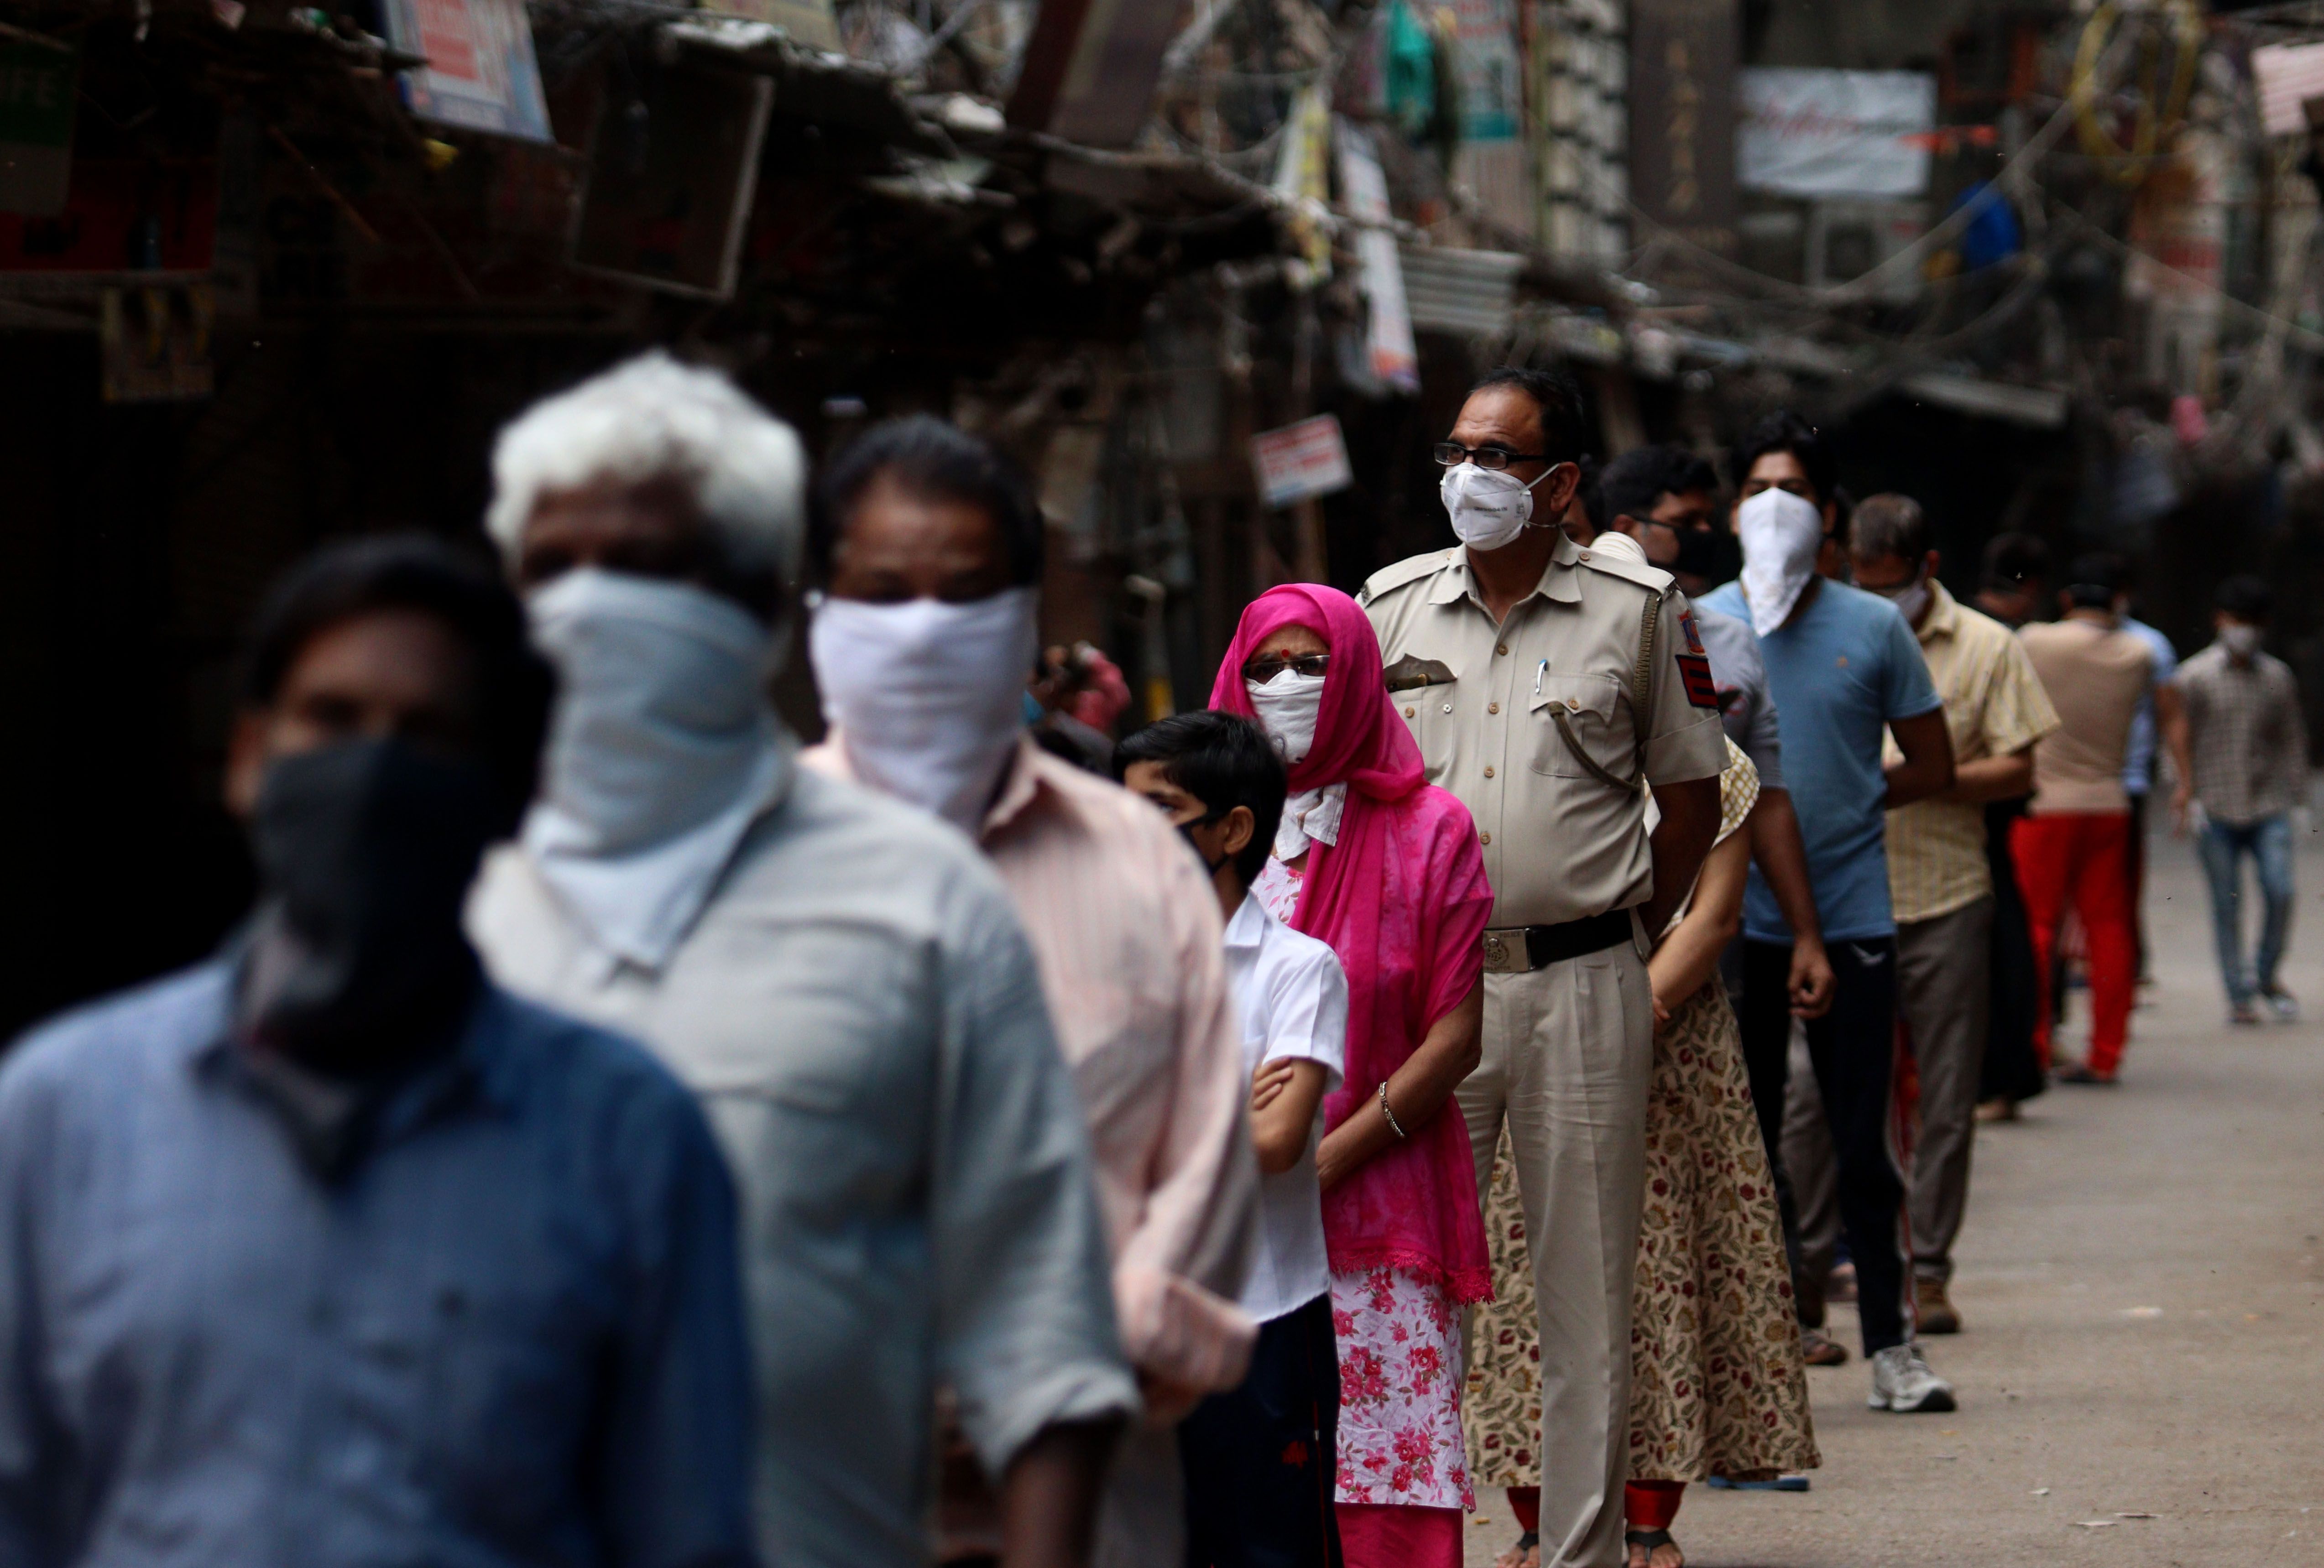 Mobile Covid-19 testing van in India. Delhi Police cop along with people stands in a queue for coronavirus test at Red Zone area, old Delhi. Image by Exposure Visuals / Shutterstock. India, 2020.